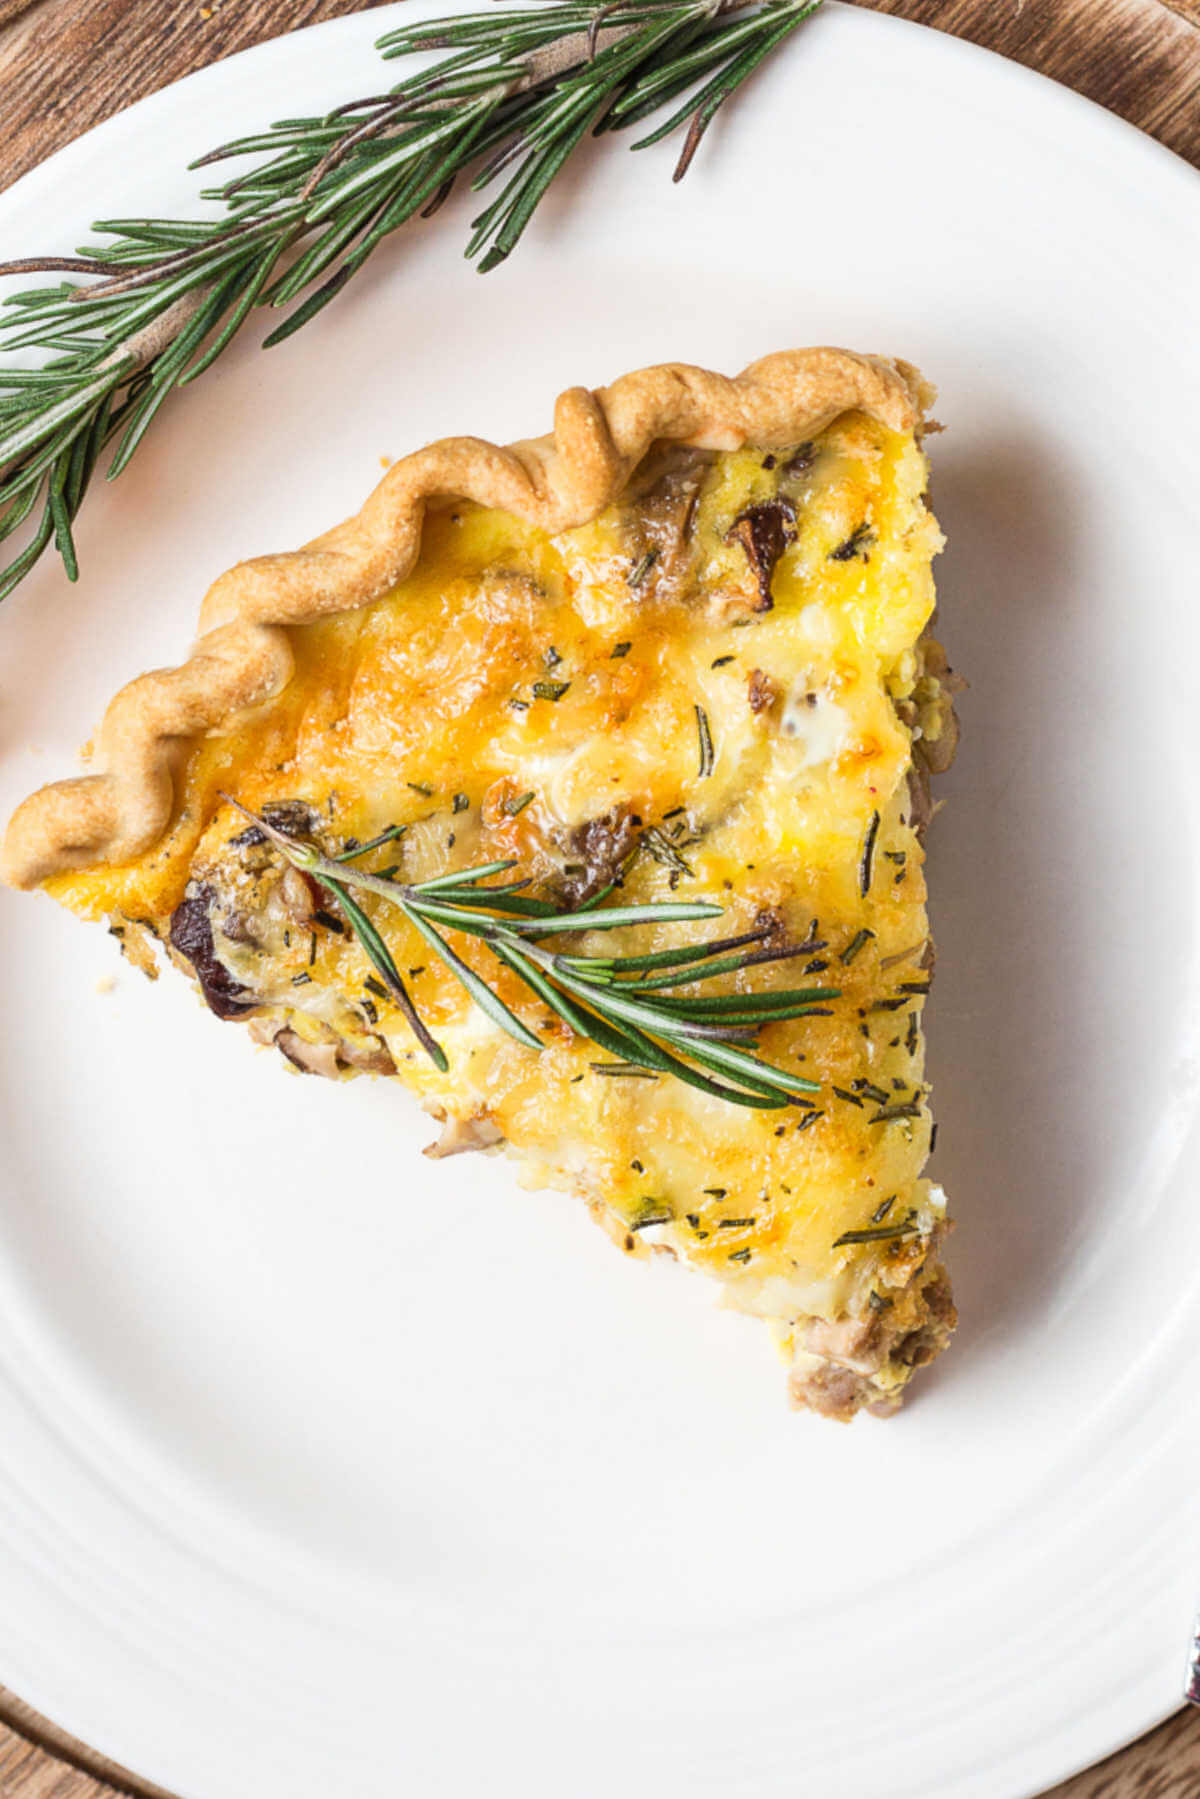 a slice of sausage quiche with a rosemary garnish.